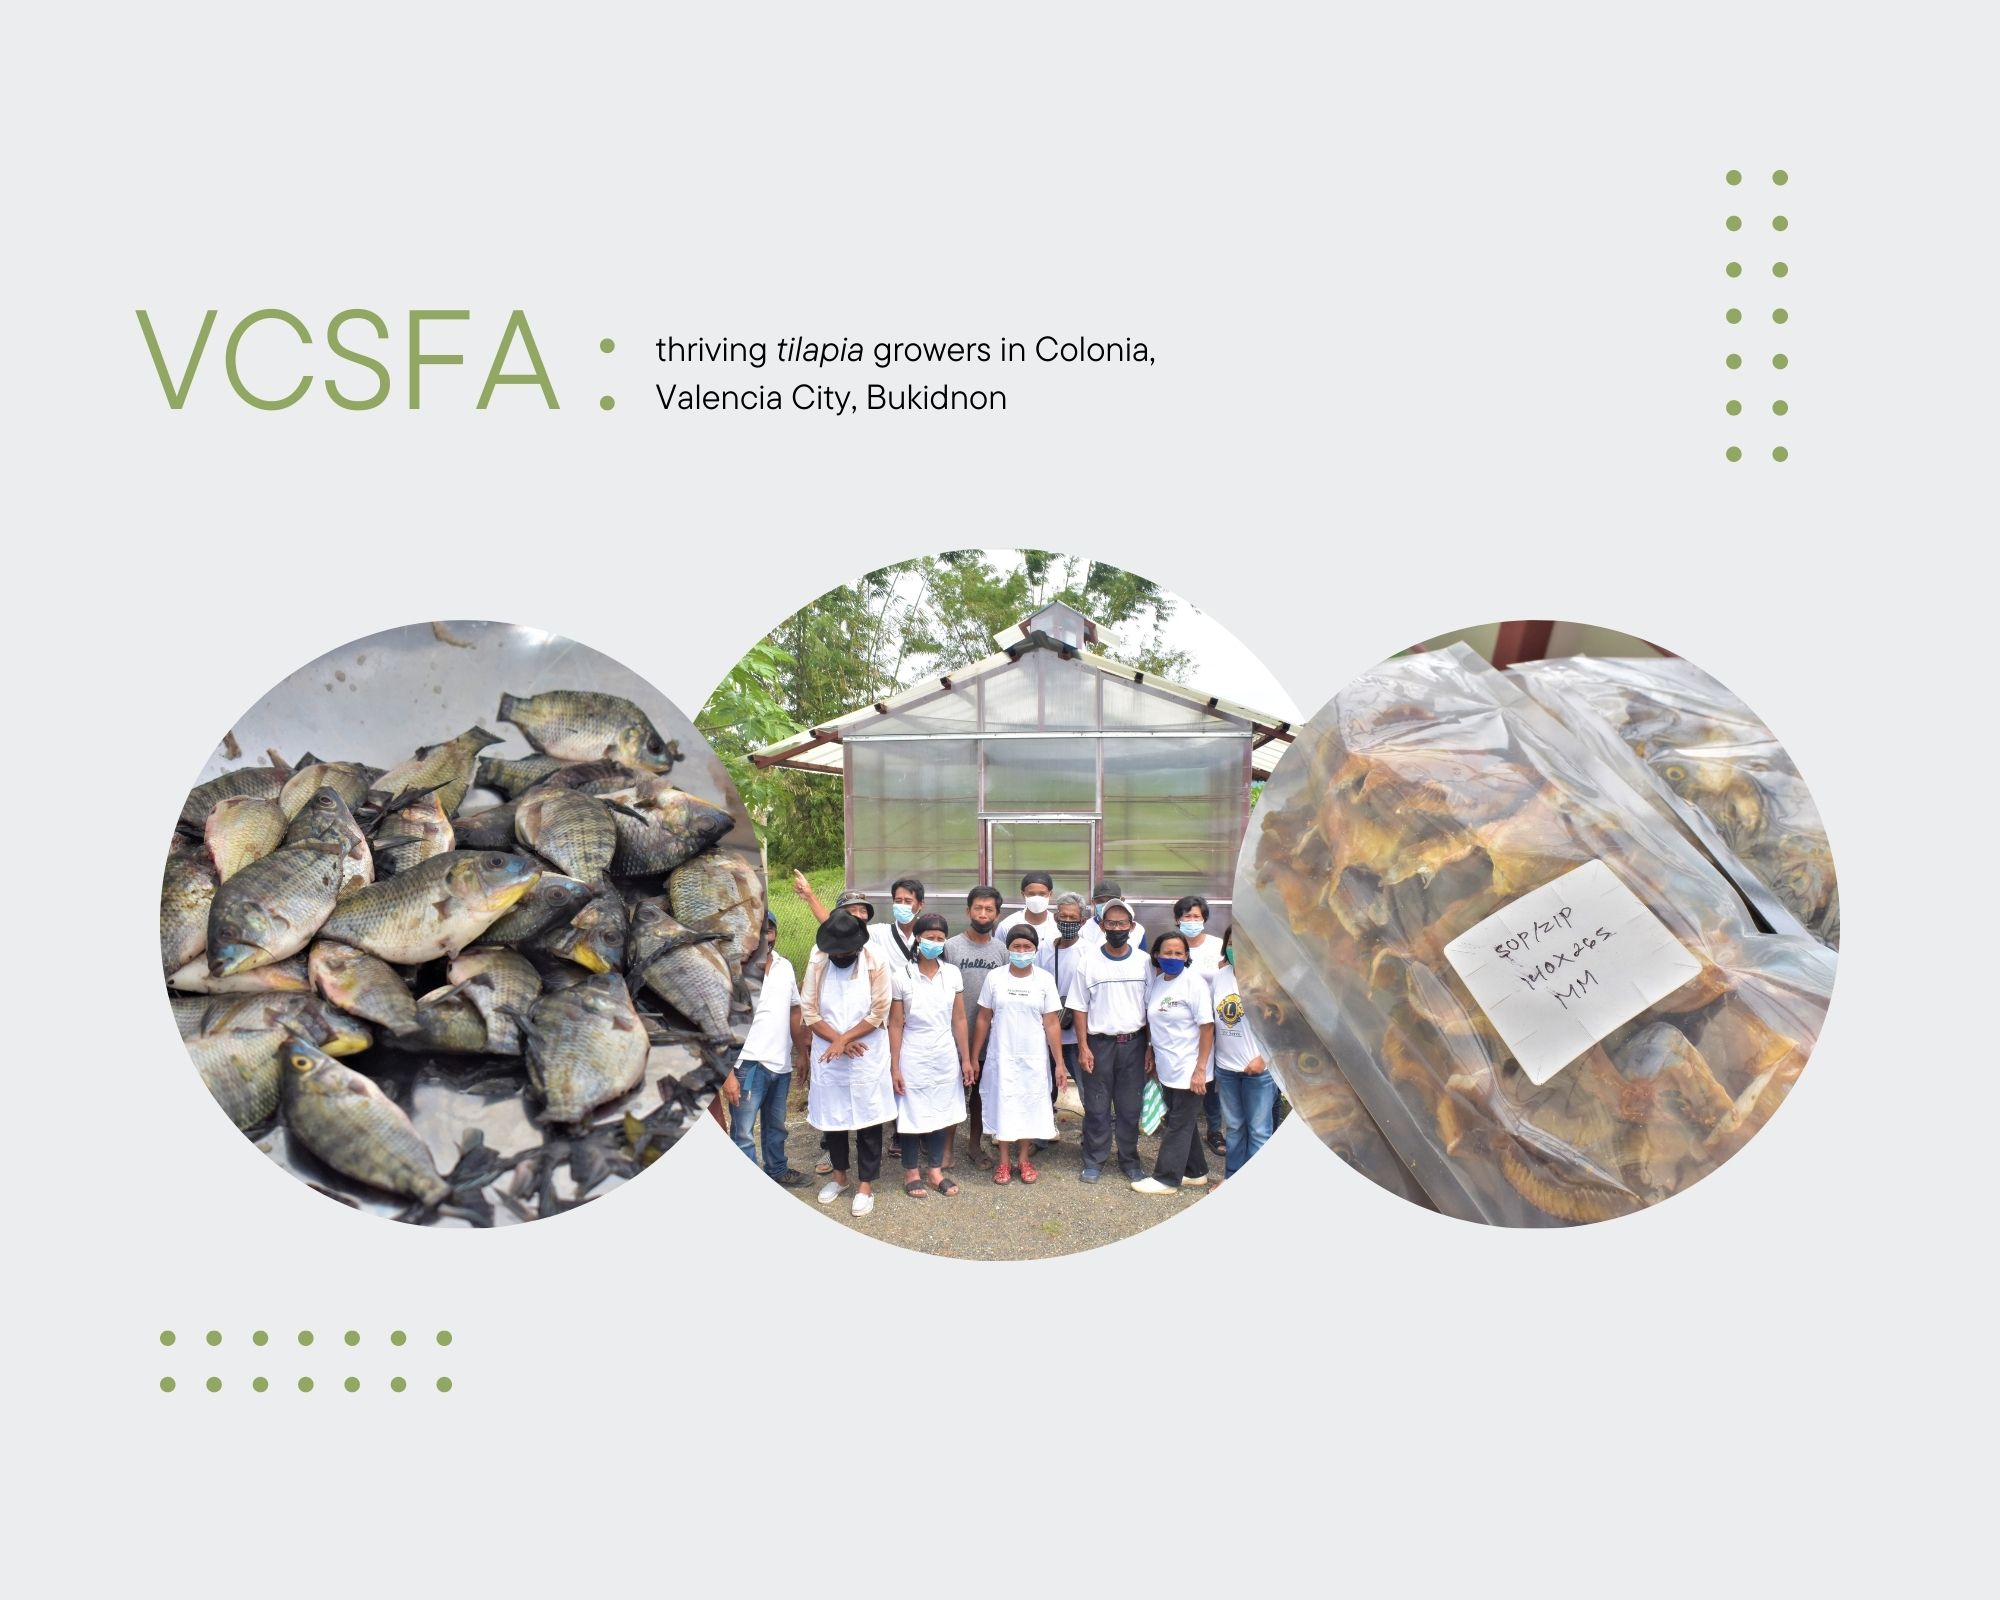 Tilapia production and value addition: A successful enterprise of VCSFA